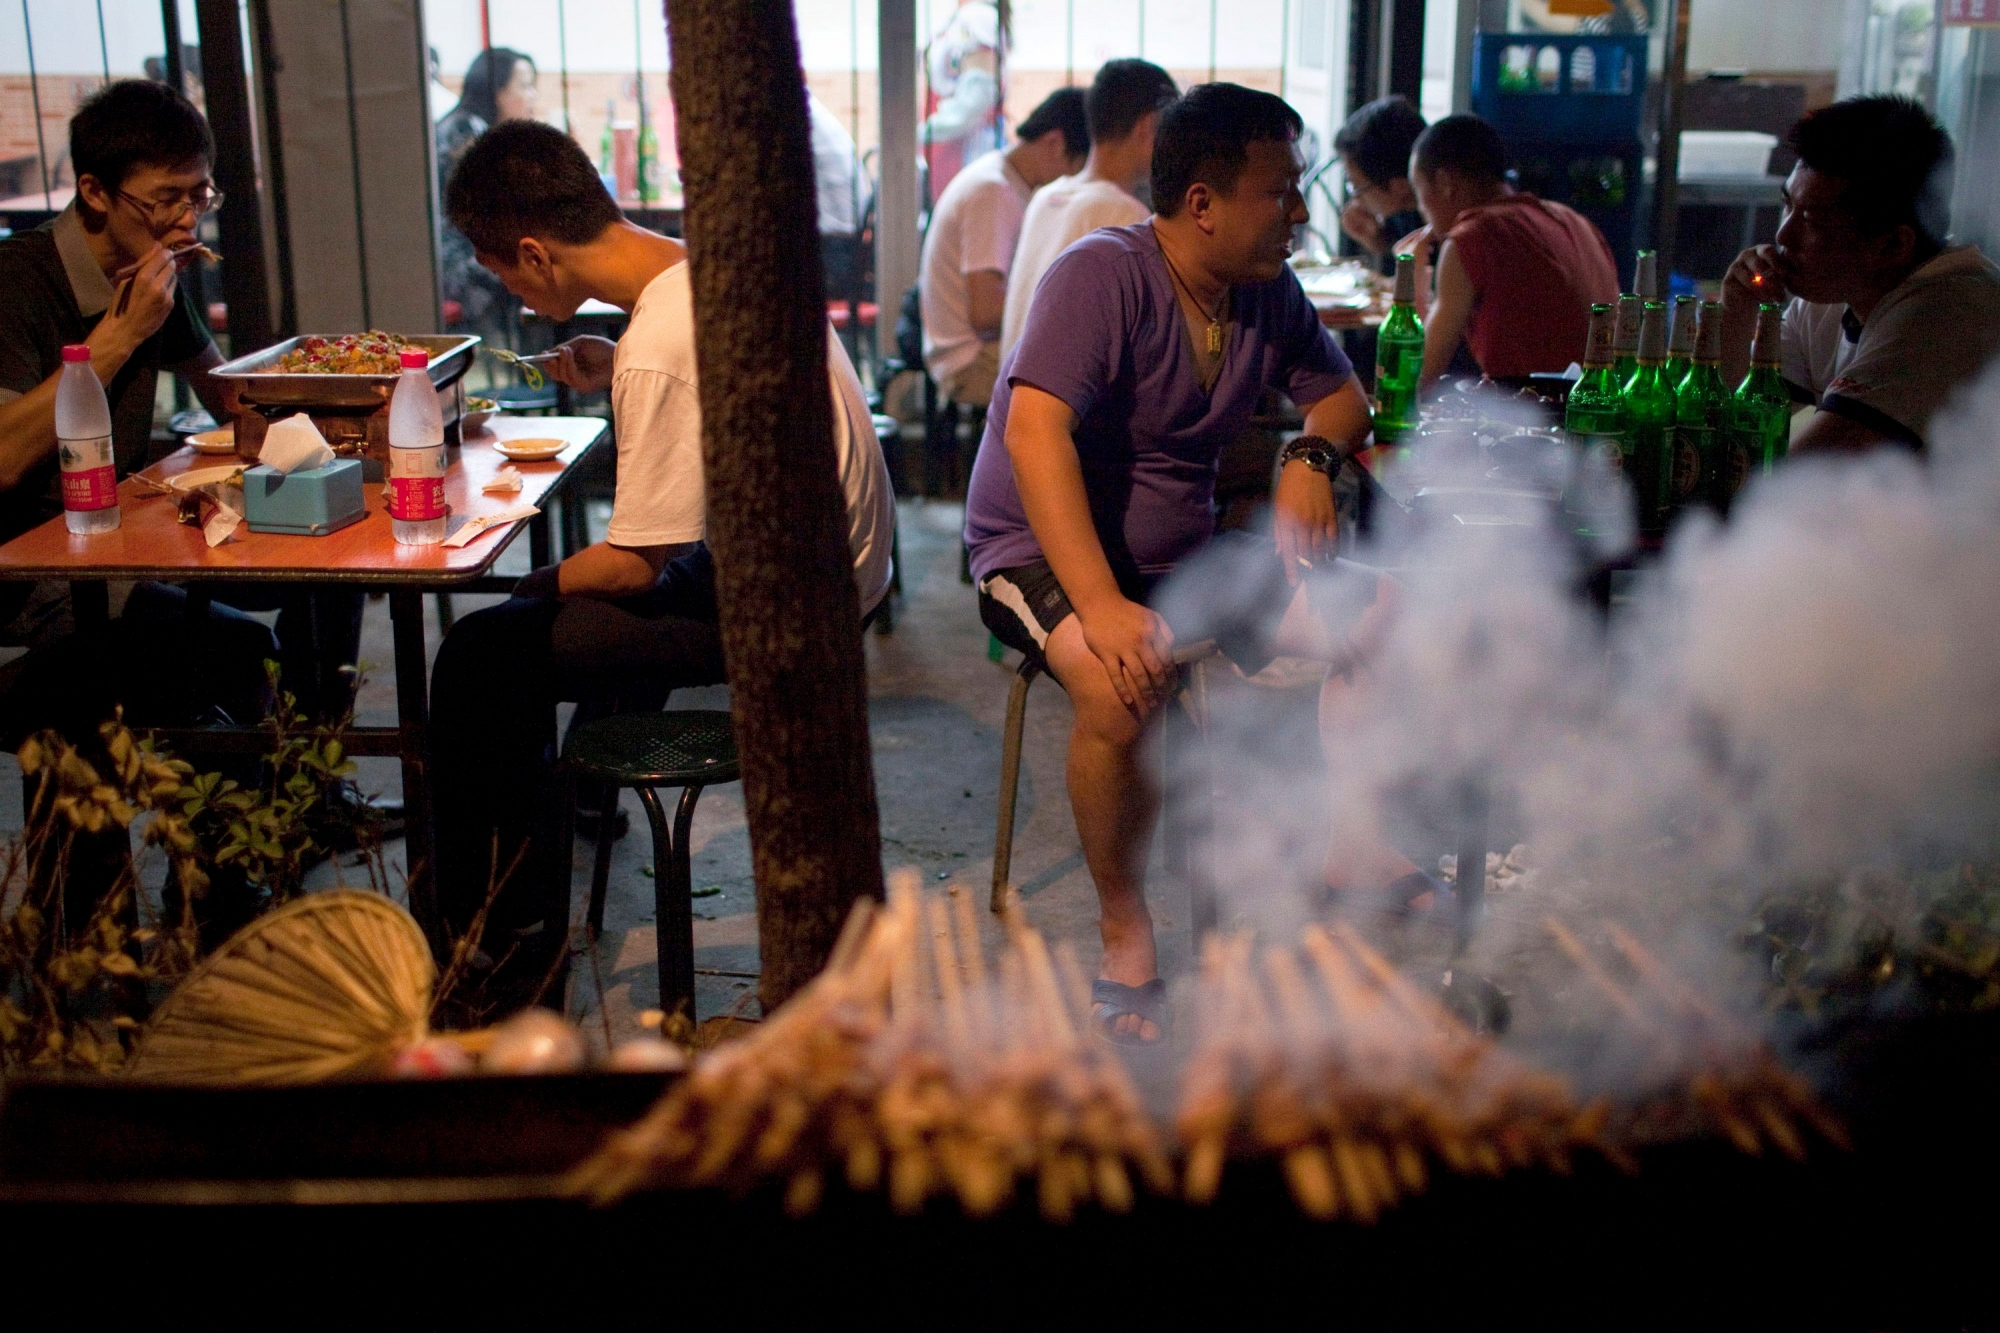 ADVANCE FOR RELEASE THURSDAY, SEPTEMBER 15, 2011, AT 12:01 A.M. EDT - In this Aug. 22, 2011 photo, people smoke cigarettes and drink beers while eating near a barbecue grill at an outdoor food stall in Beijing, China. Heart disease, cancer, and respiratory disease have replaced hepatitis, diarrhea and malaria as desk work replaces farming, cars replace bicycles, and smoking remains stubbornly popular. (AP Photo/Alexander F. Yuan) China Chronic Disease